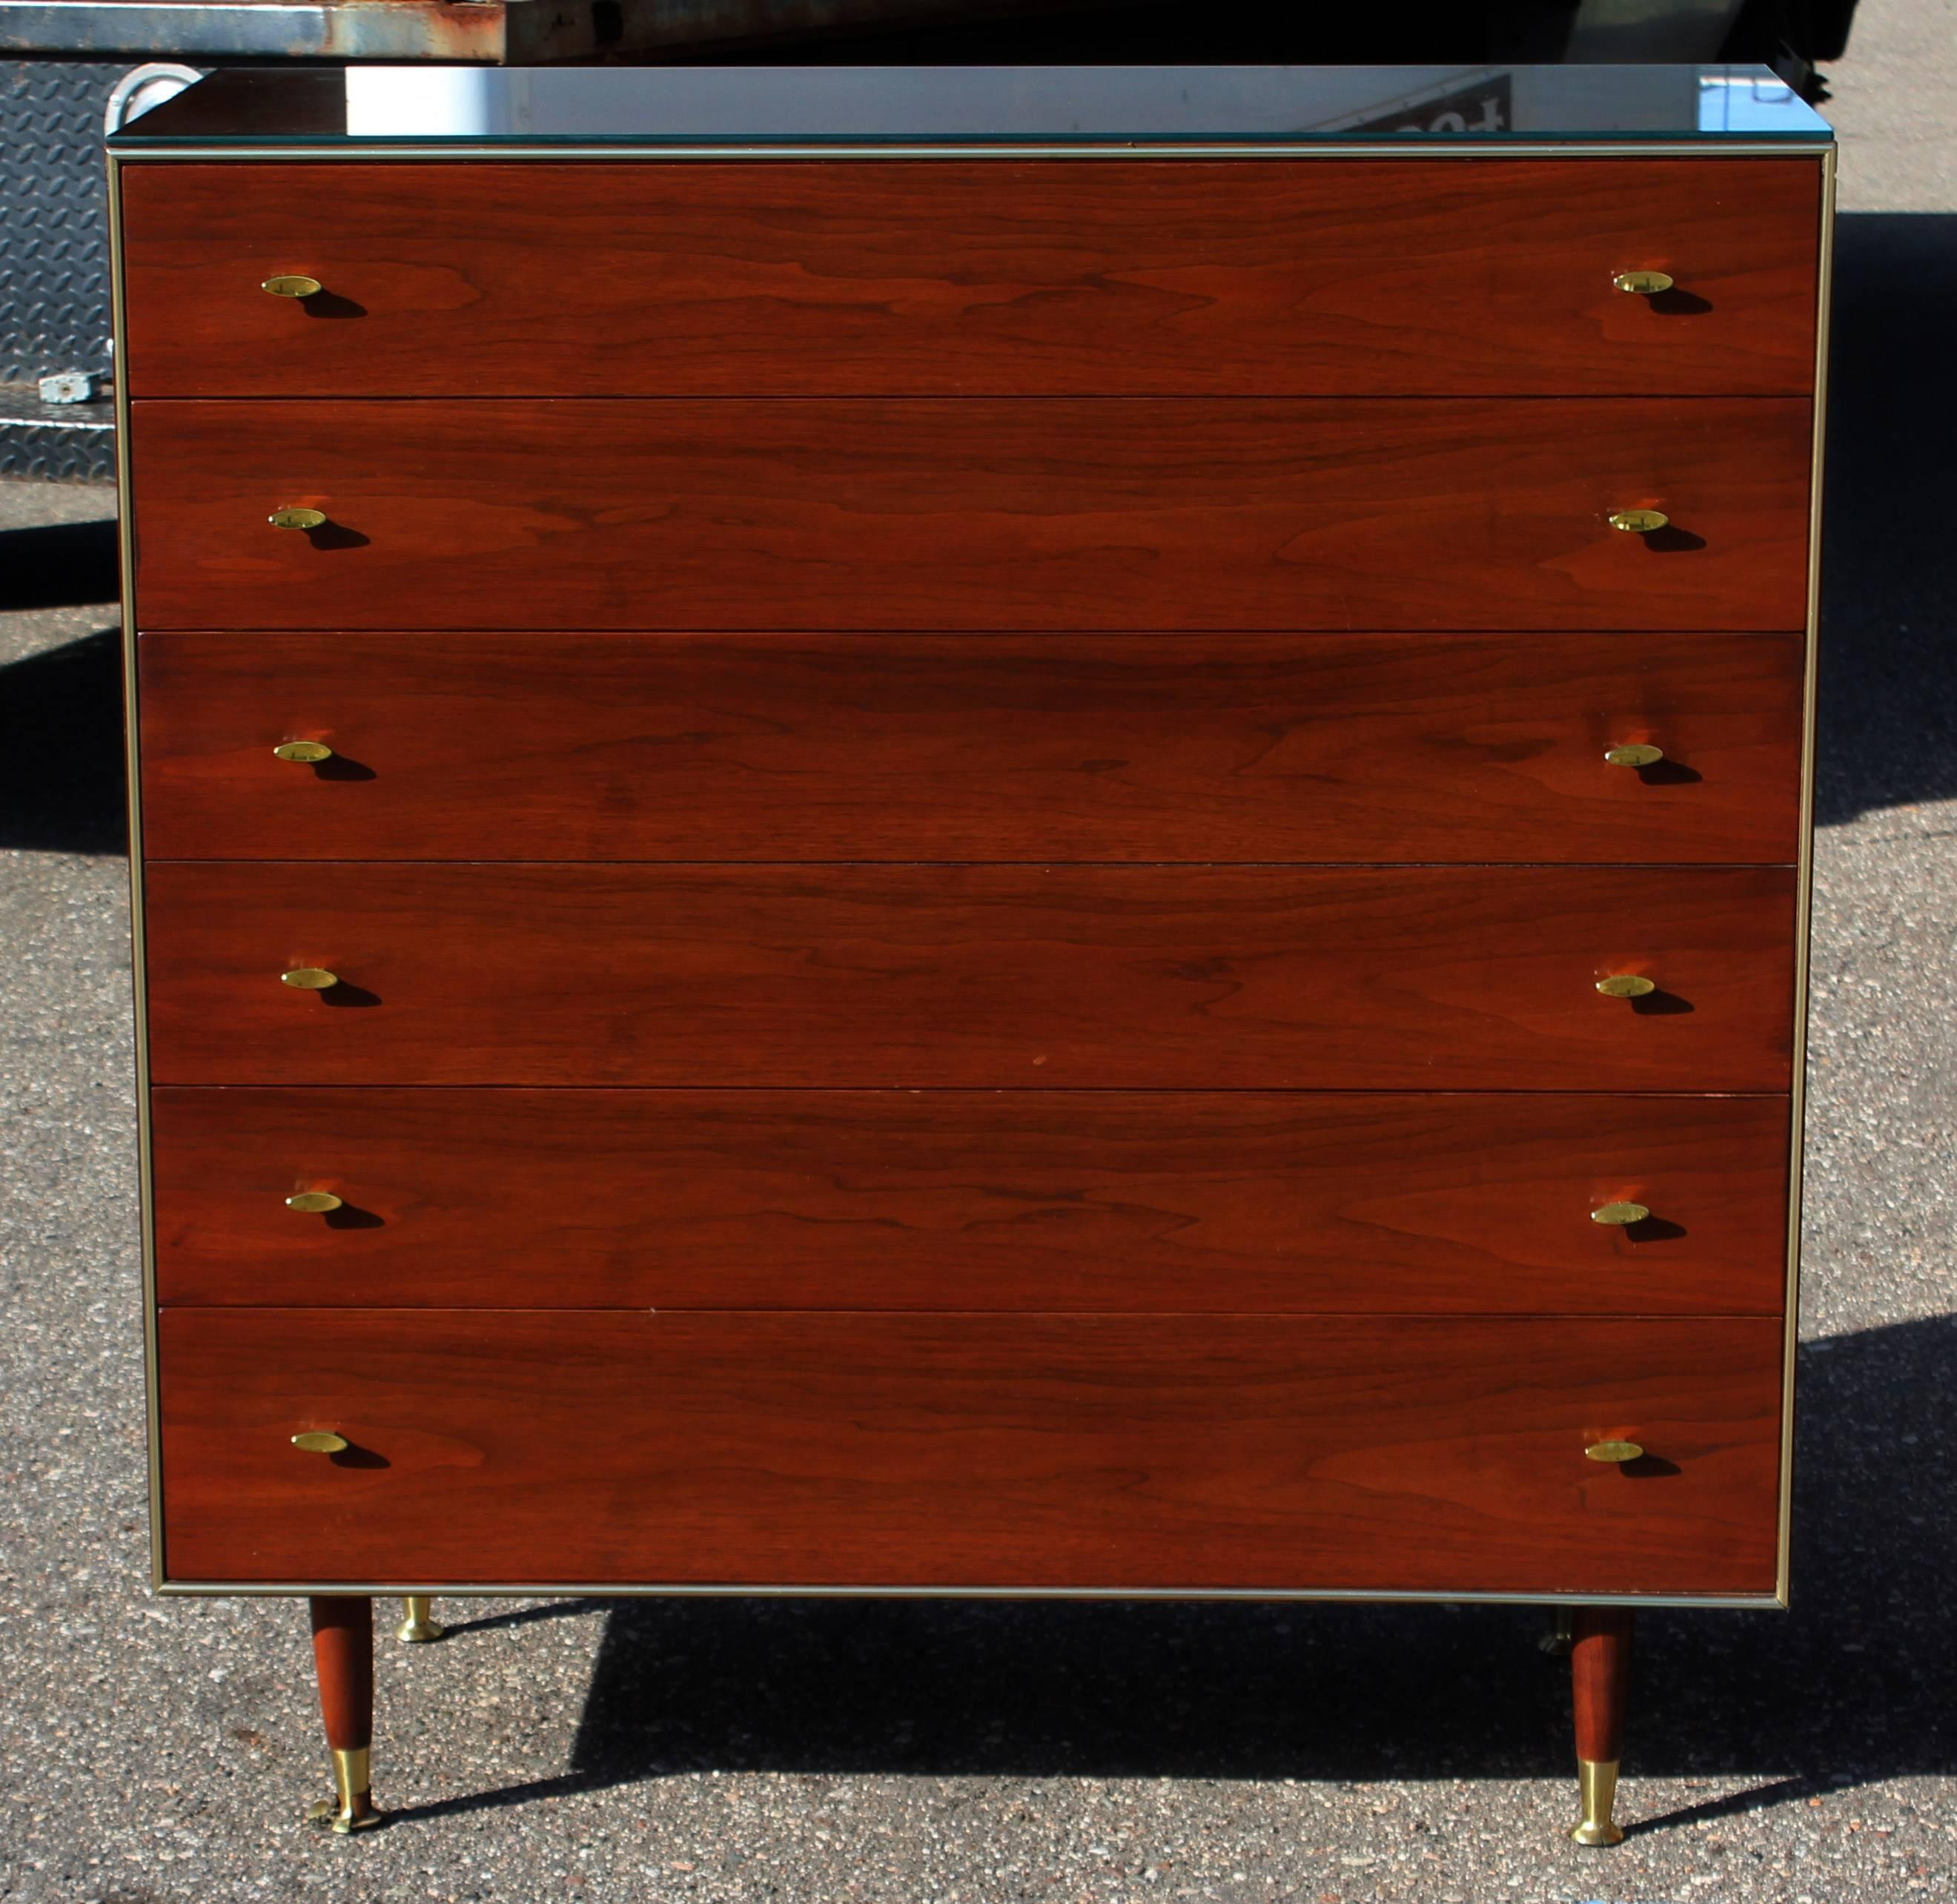 For your consideration is a magnificent, walnut bedroom set, including a highboy cabinet, lowboy credenza dresser and a pair of nightstands. Lowboy has an attachable mirror, shown in photos. This set was made in the 1950s by R-Way Furniture. In